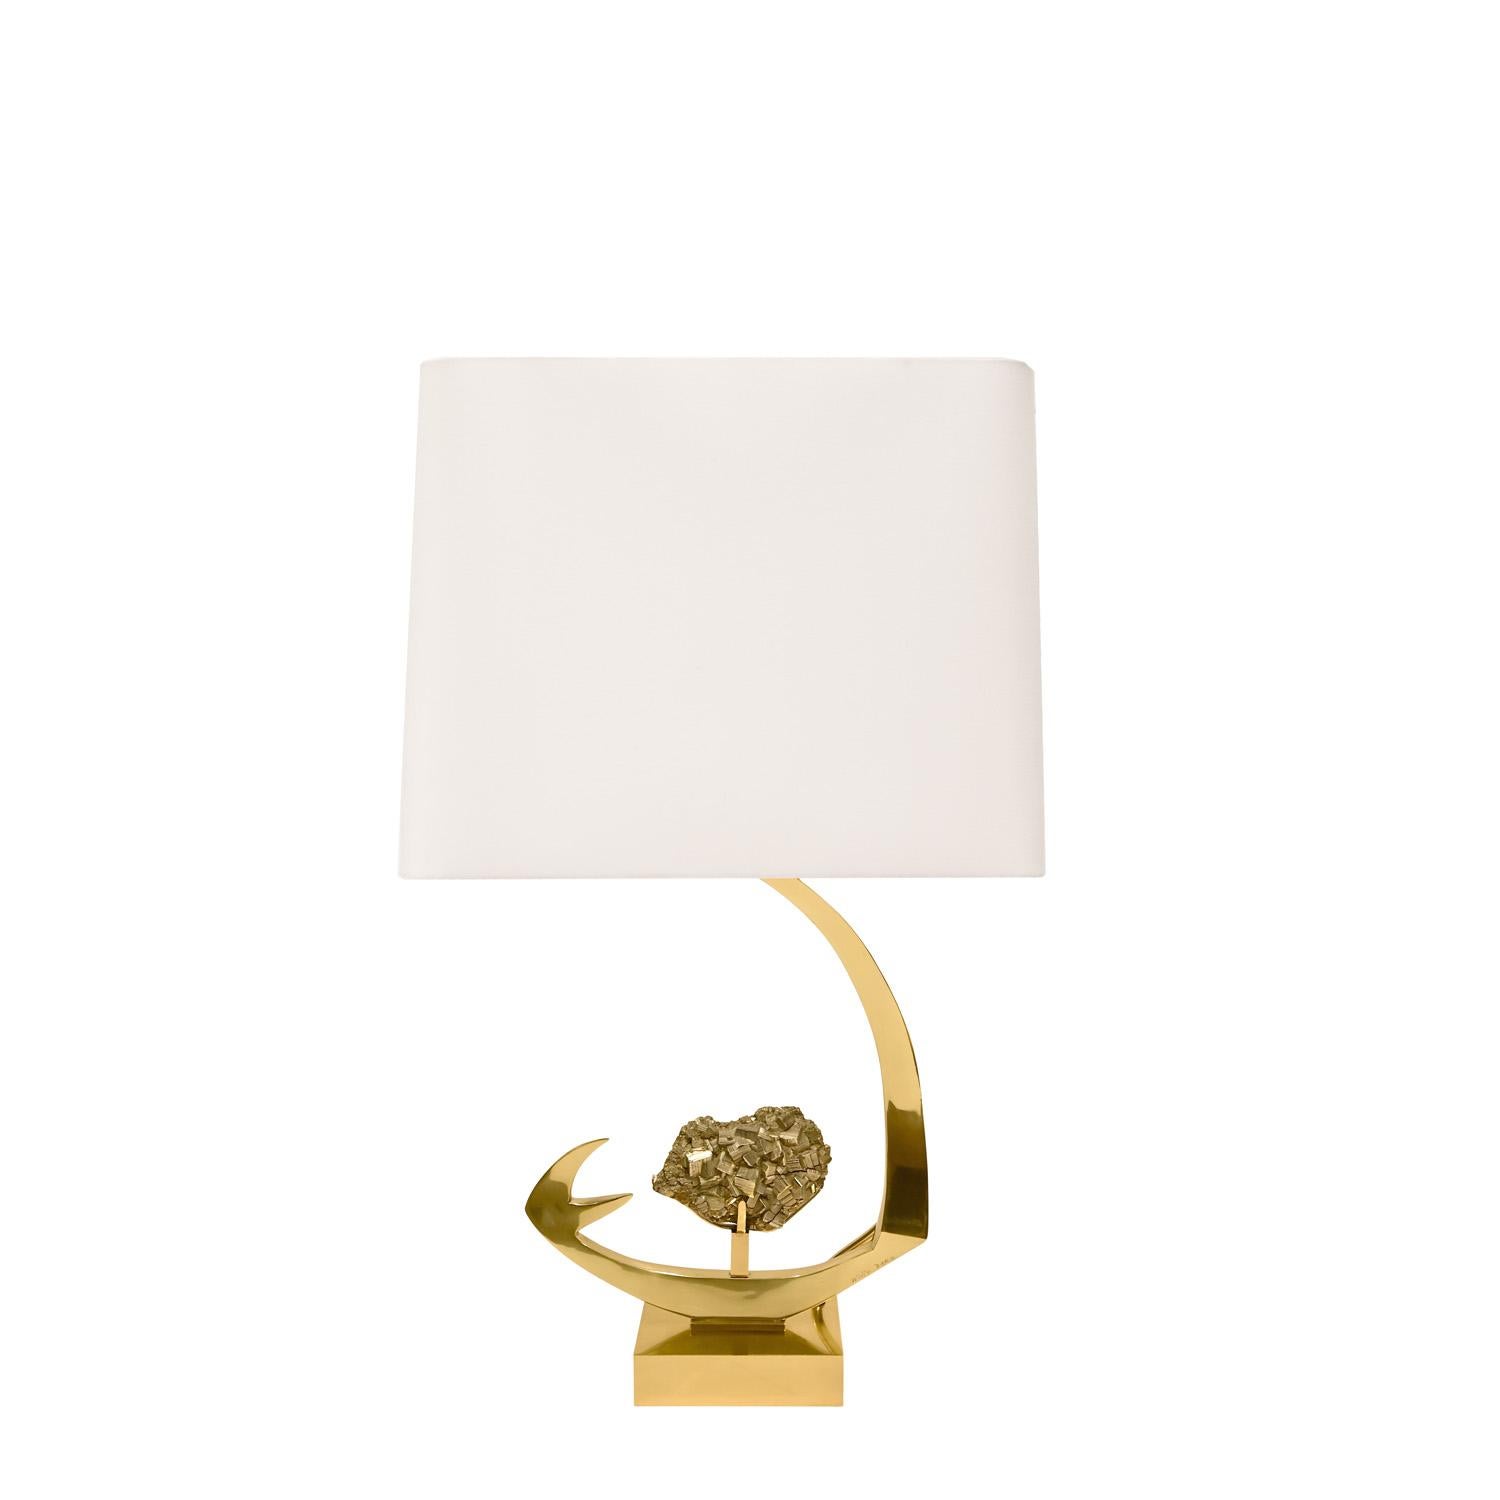 Sculptural table lamp in polished brass with mounted pyrite crystal by Willy Daro, Belgium 1970's (etched signature reads Willy Daro). This lamp is a stunning sculptural work of art.

W: 7 inches
D: 4 inches
H: 27 inches
Shade Diam: 18 inches
Shade